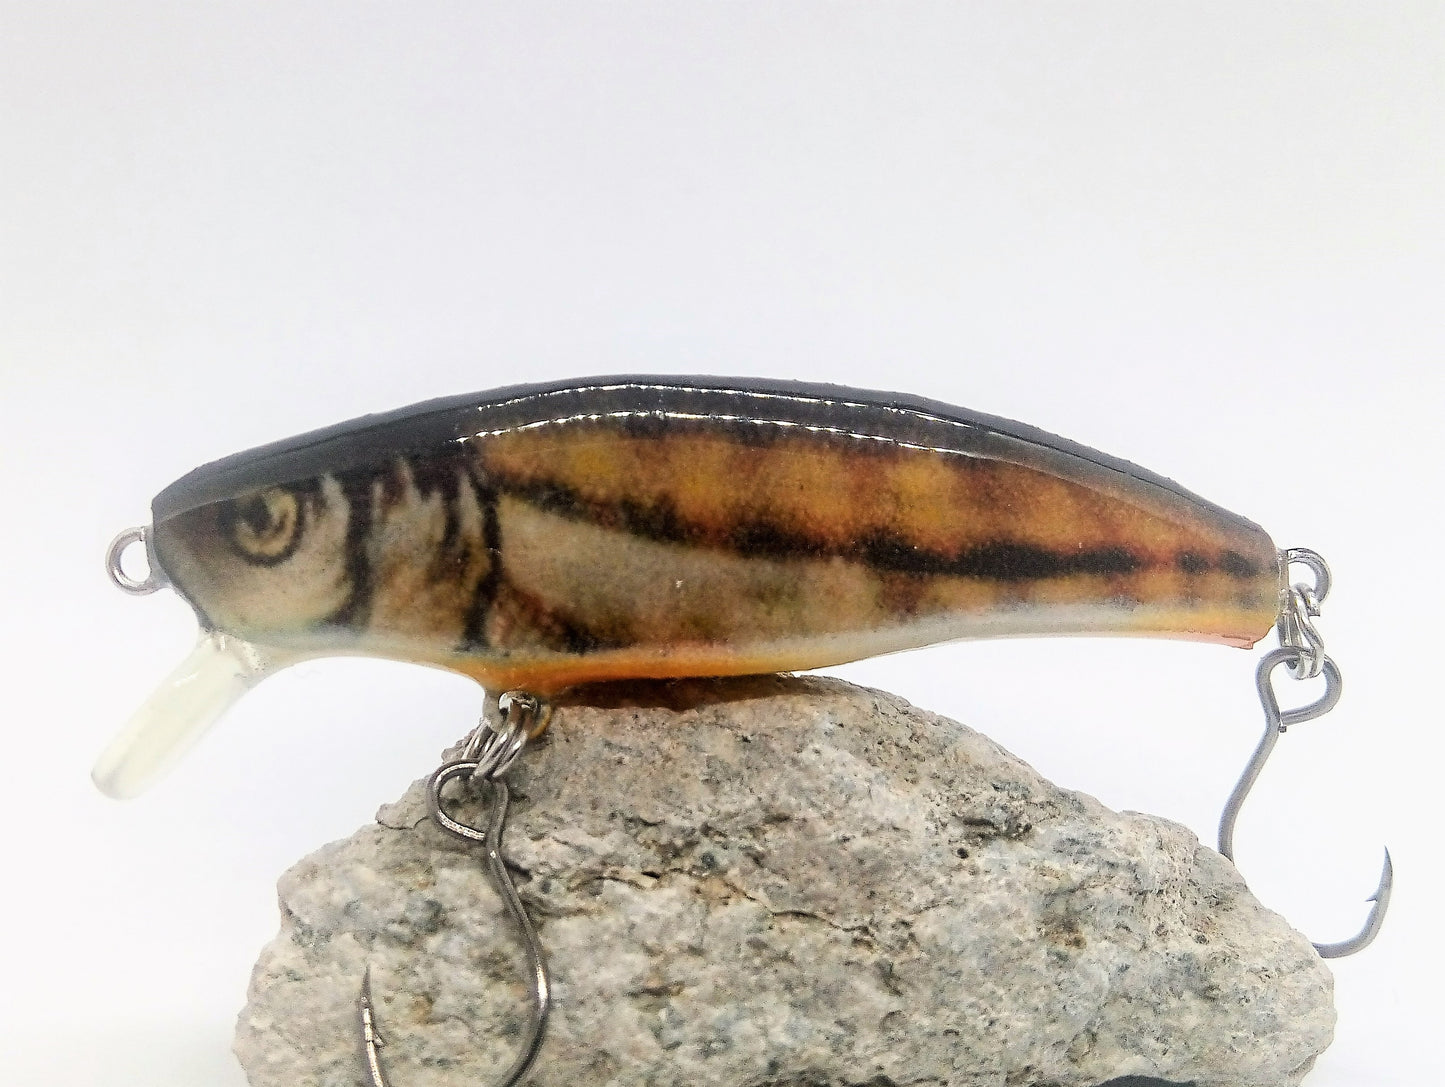 Realistic Minnow Sleeper - end of series